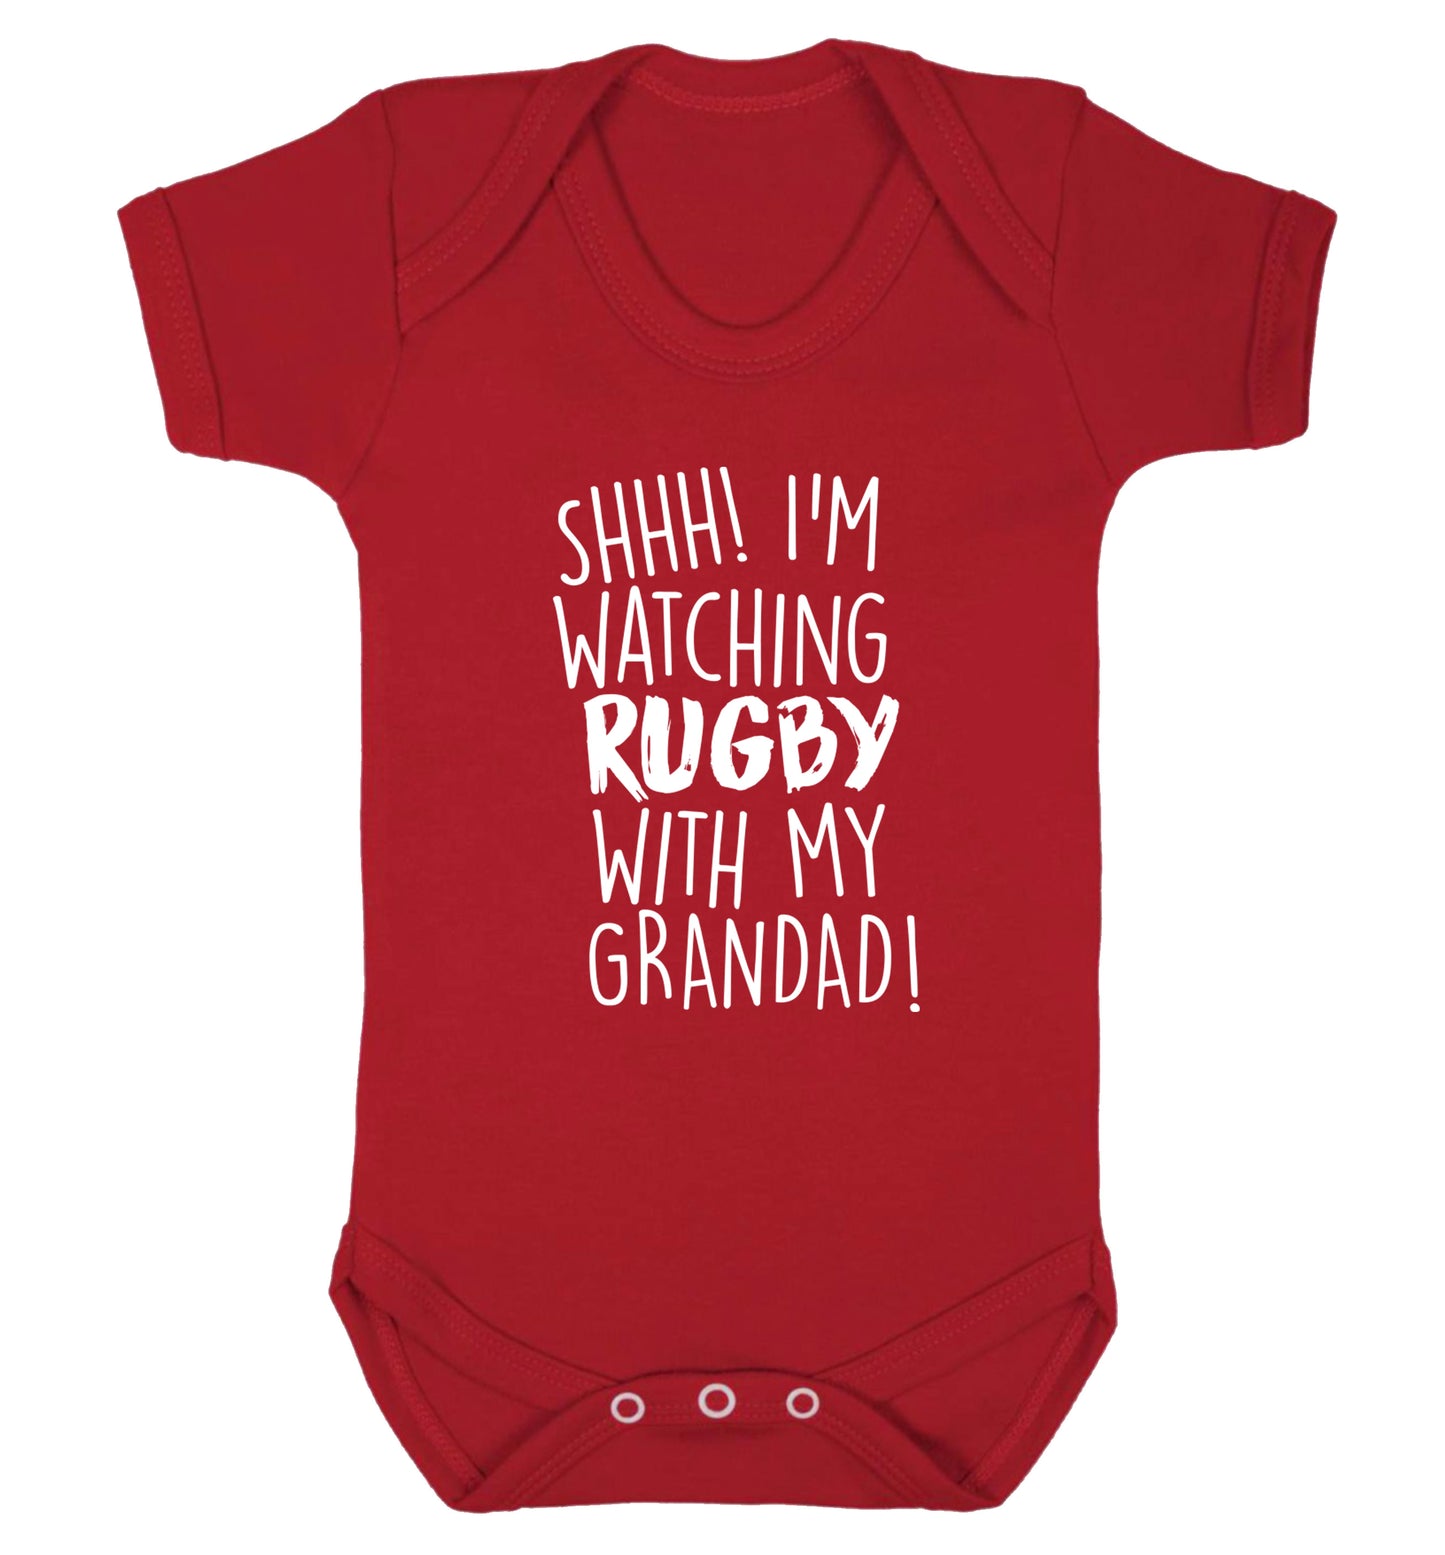 Shh I'm watching rugby with my grandad Baby Vest red 18-24 months